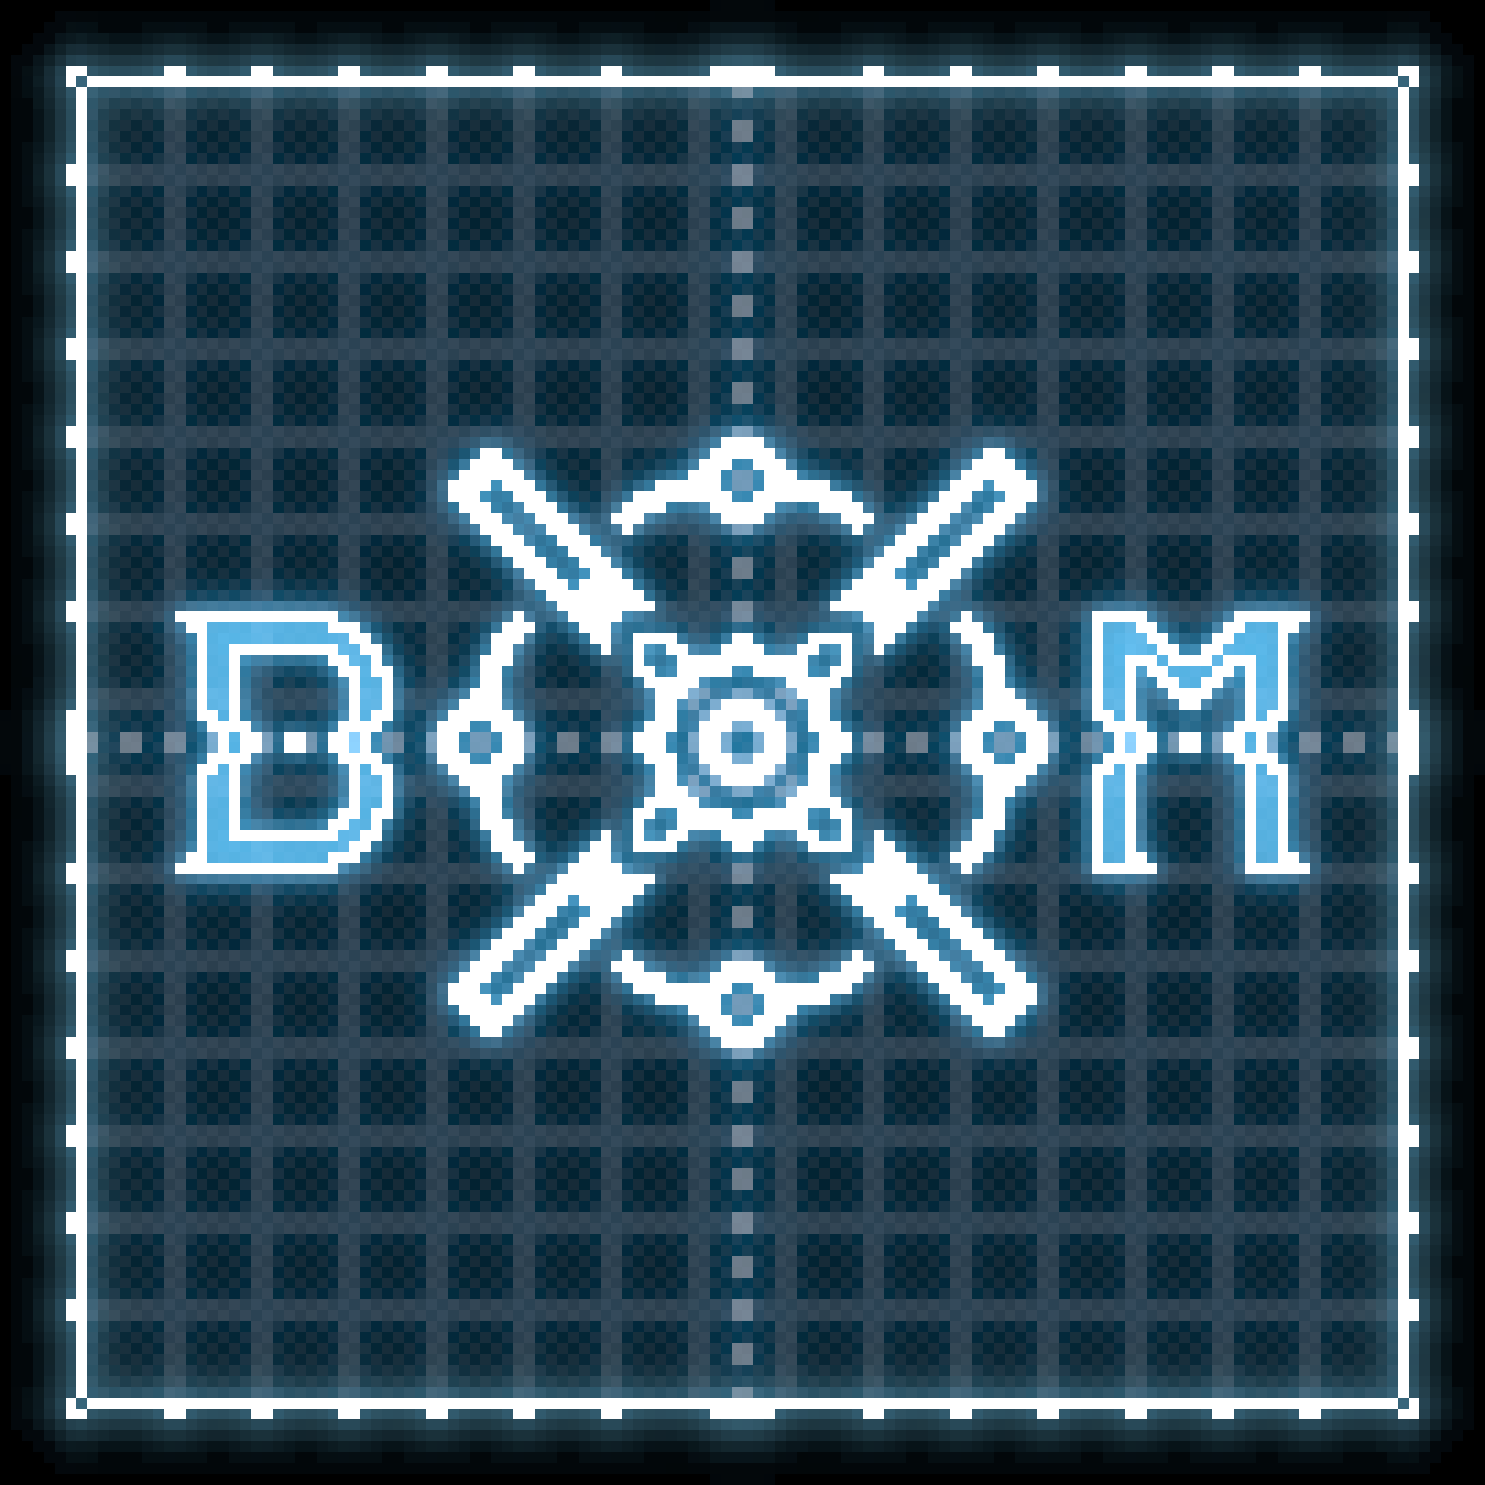 Stylized writing of 'dxm' the name of the game over a neon grid.